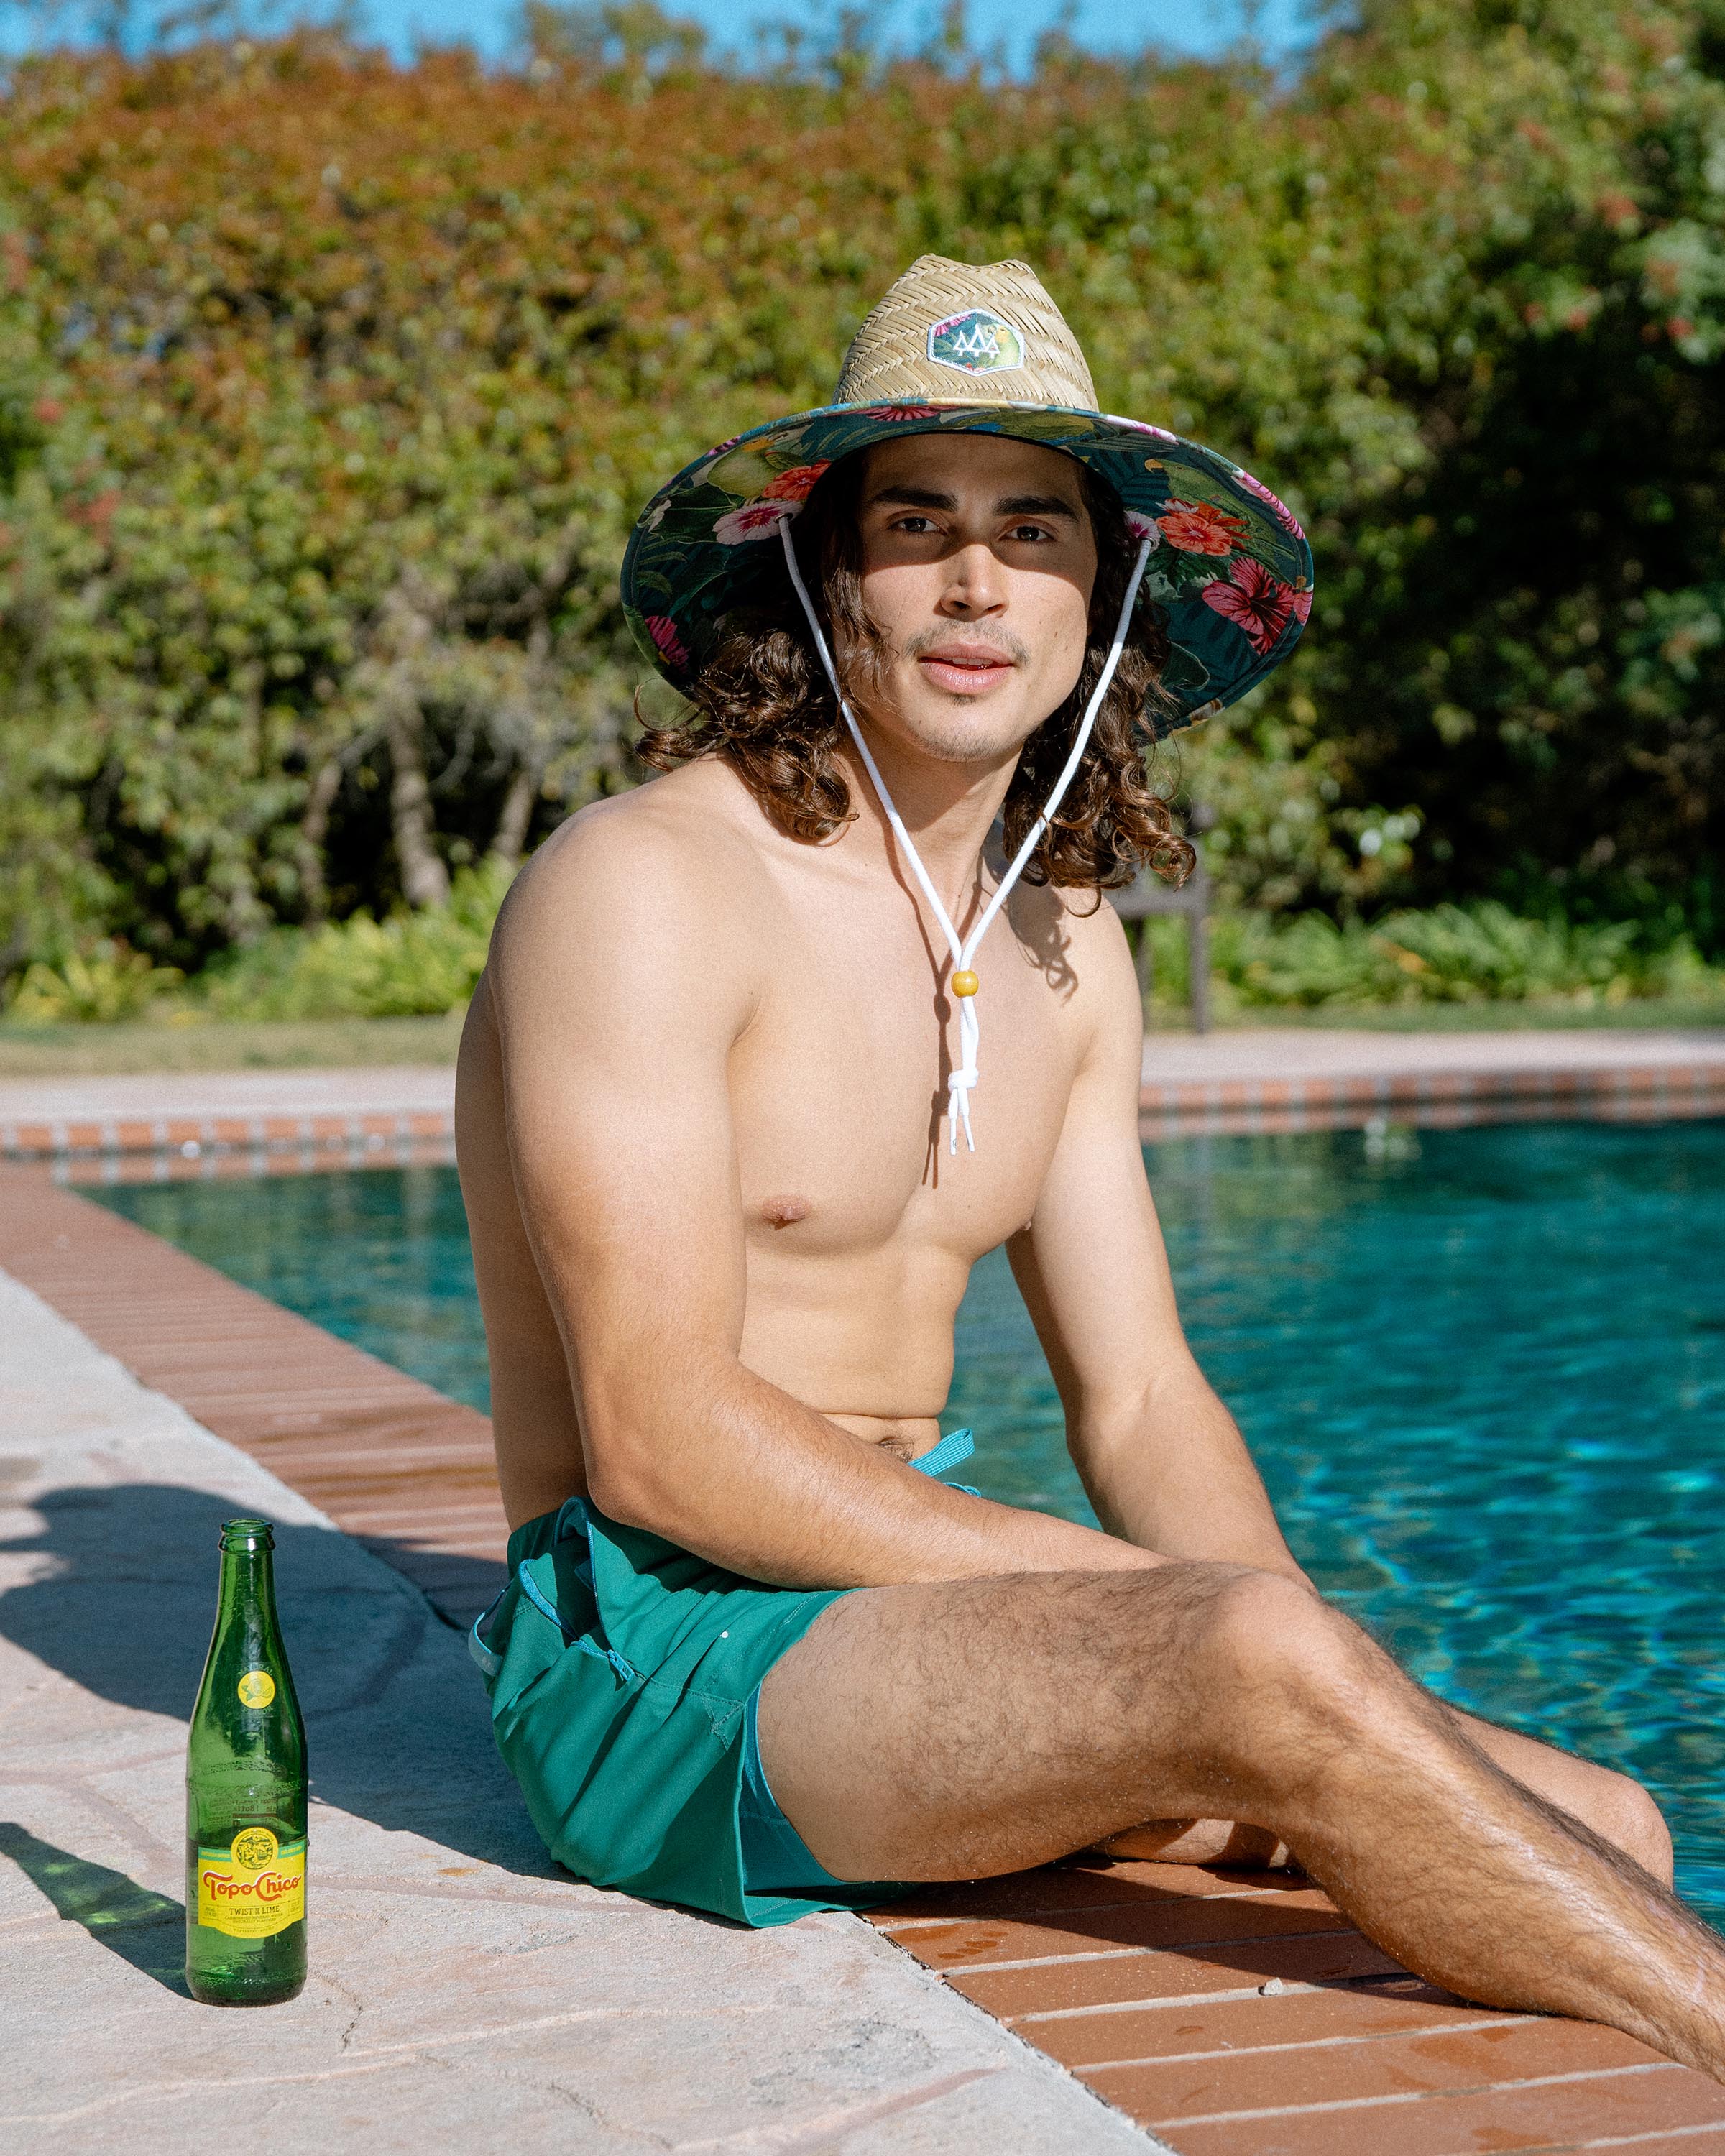 Hemlock male model looking straight wearing Caicos straw lifeguard hat with green parrot pattern